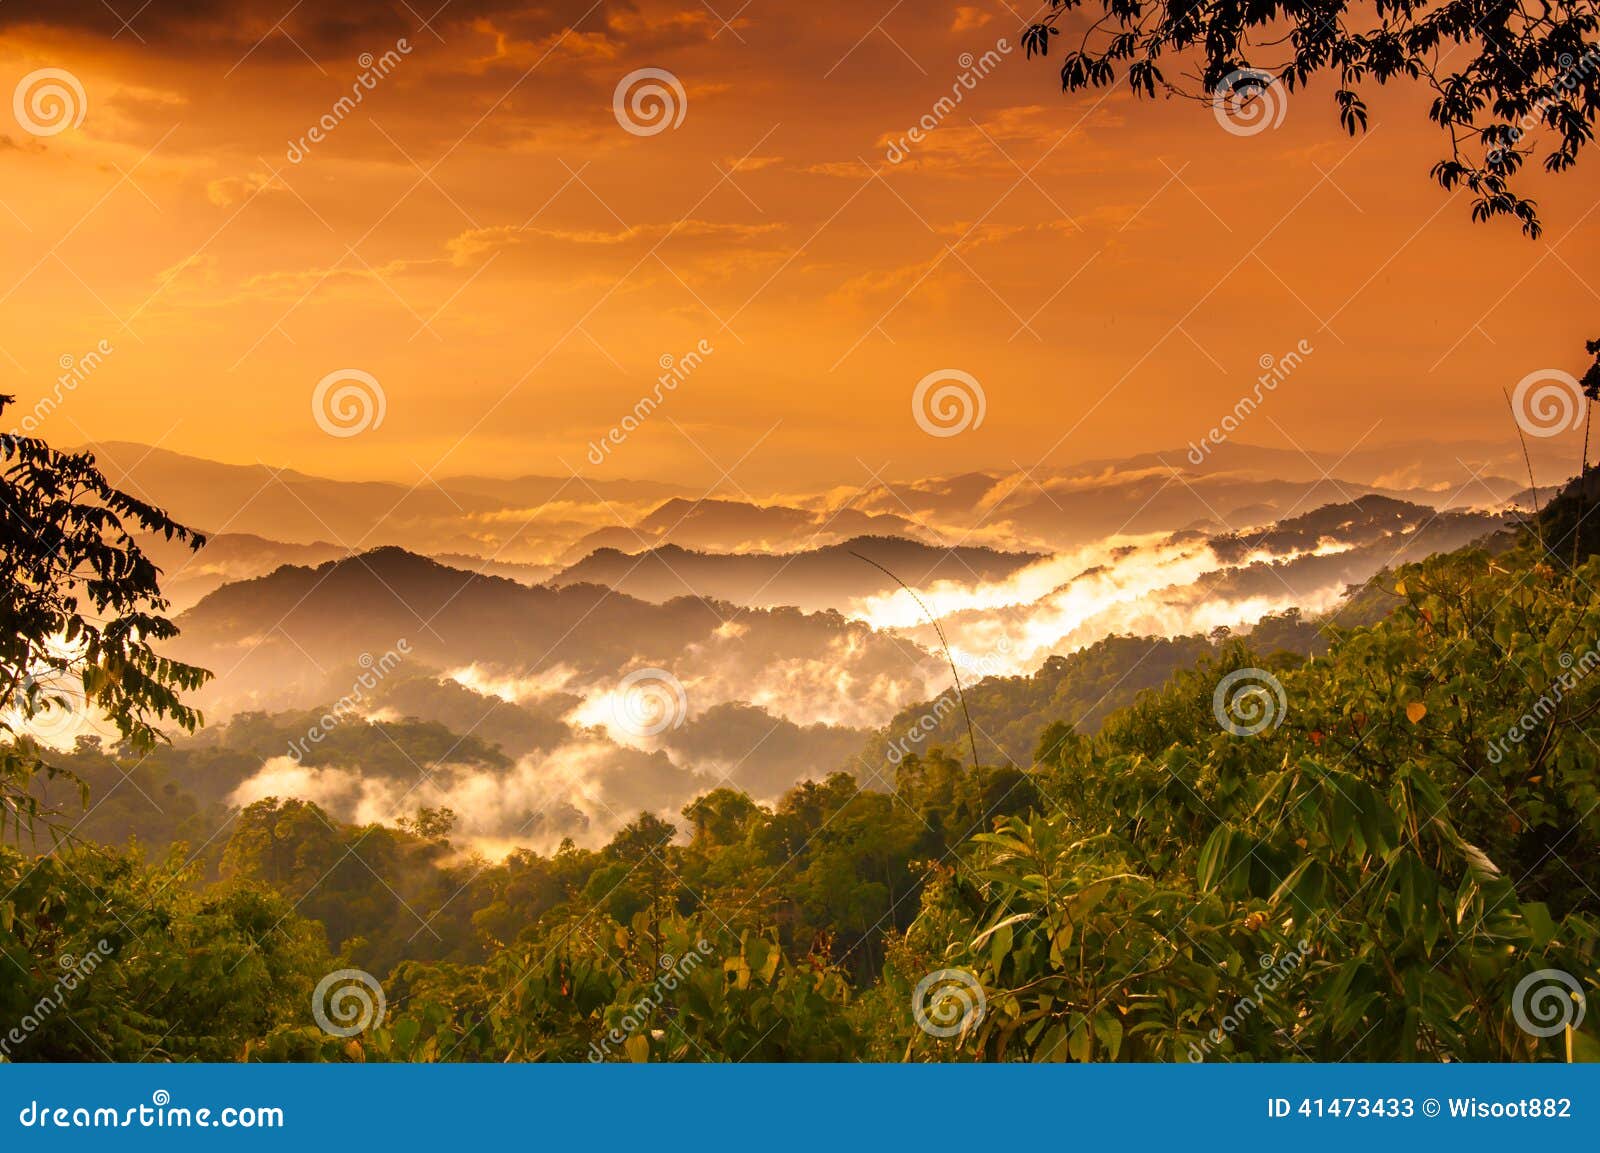 mountian and cloud in tropical forest